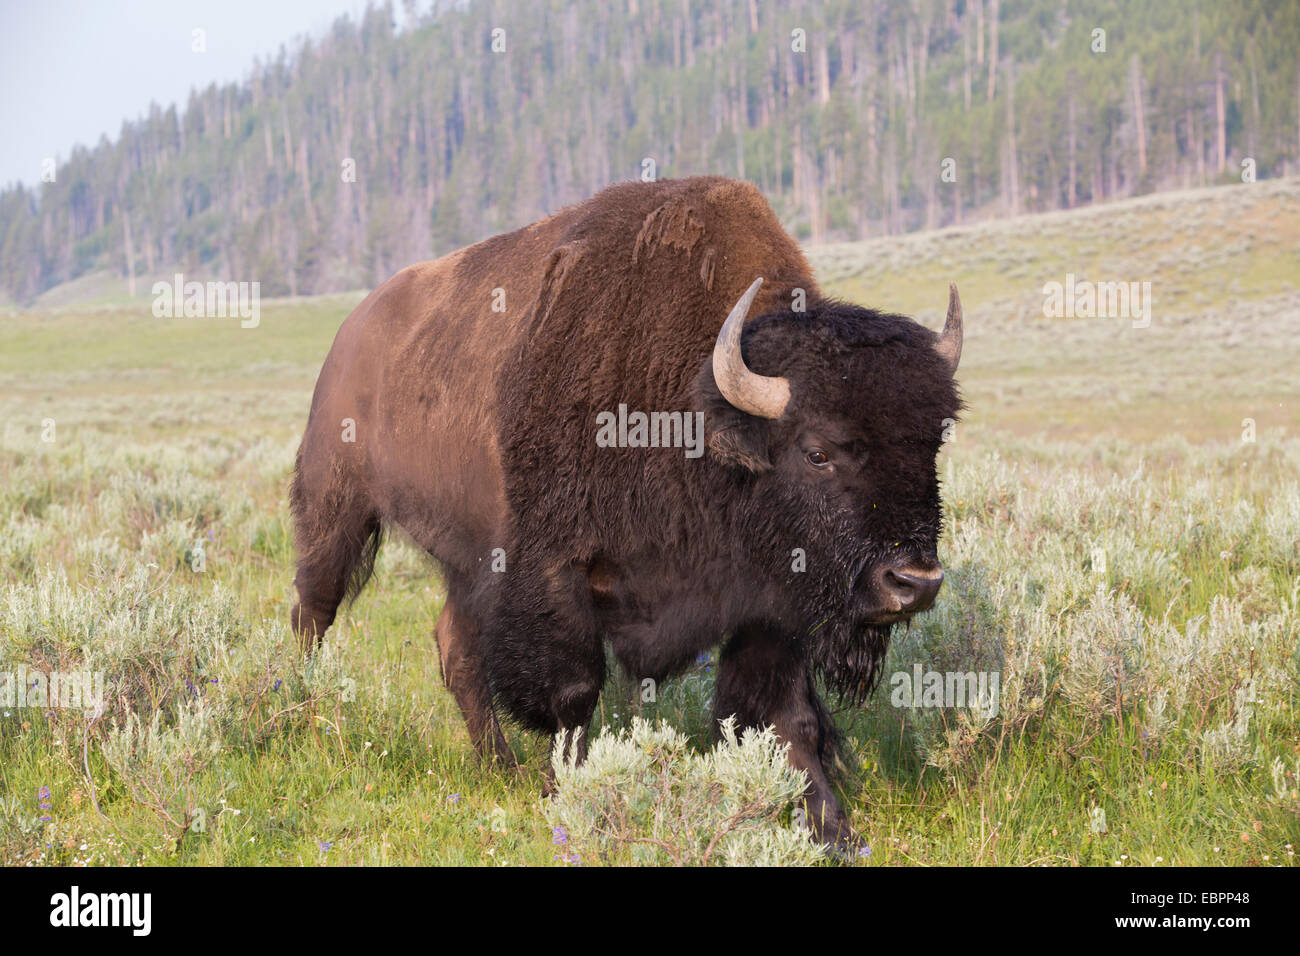 Bison (Bison bison), Hayden Valley, le Parc National de Yellowstone, UNESCO World Heritage Site, Wyoming, United States of America Banque D'Images